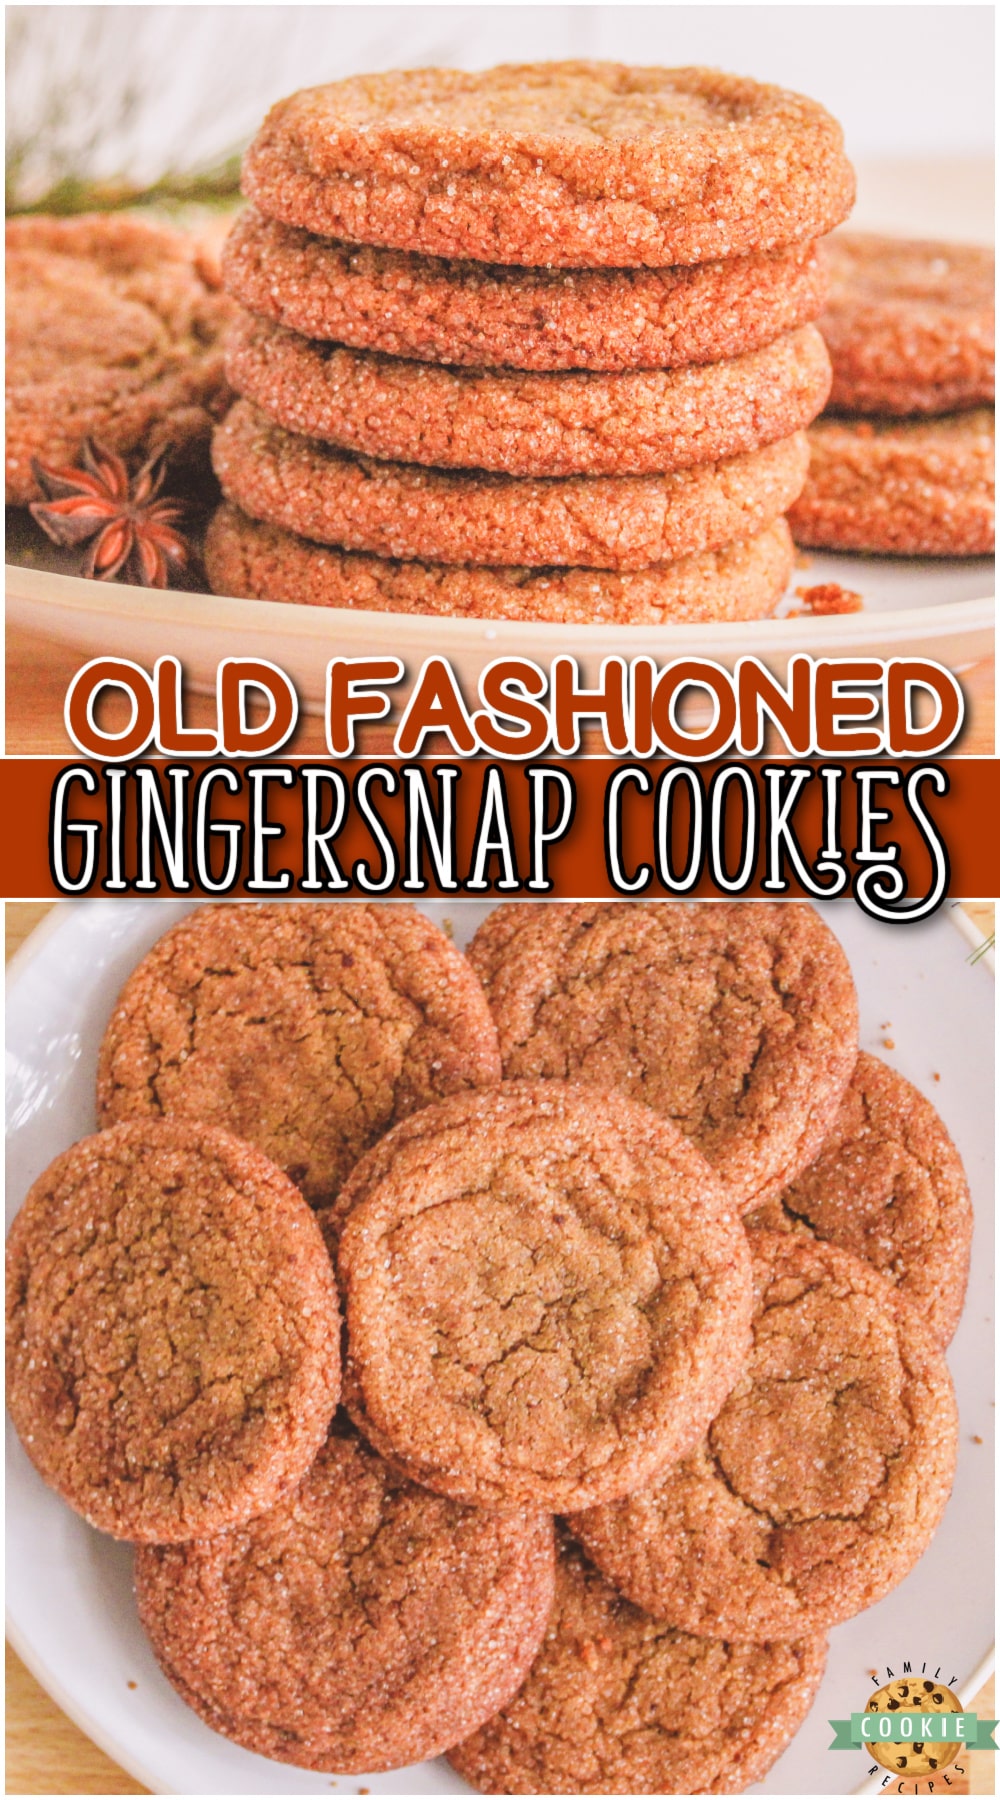 Gingersnap Cookies are a crisp, spicy & iconic holiday favorite! Make some gingersnap cookies at home and enjoy this classic recipe.